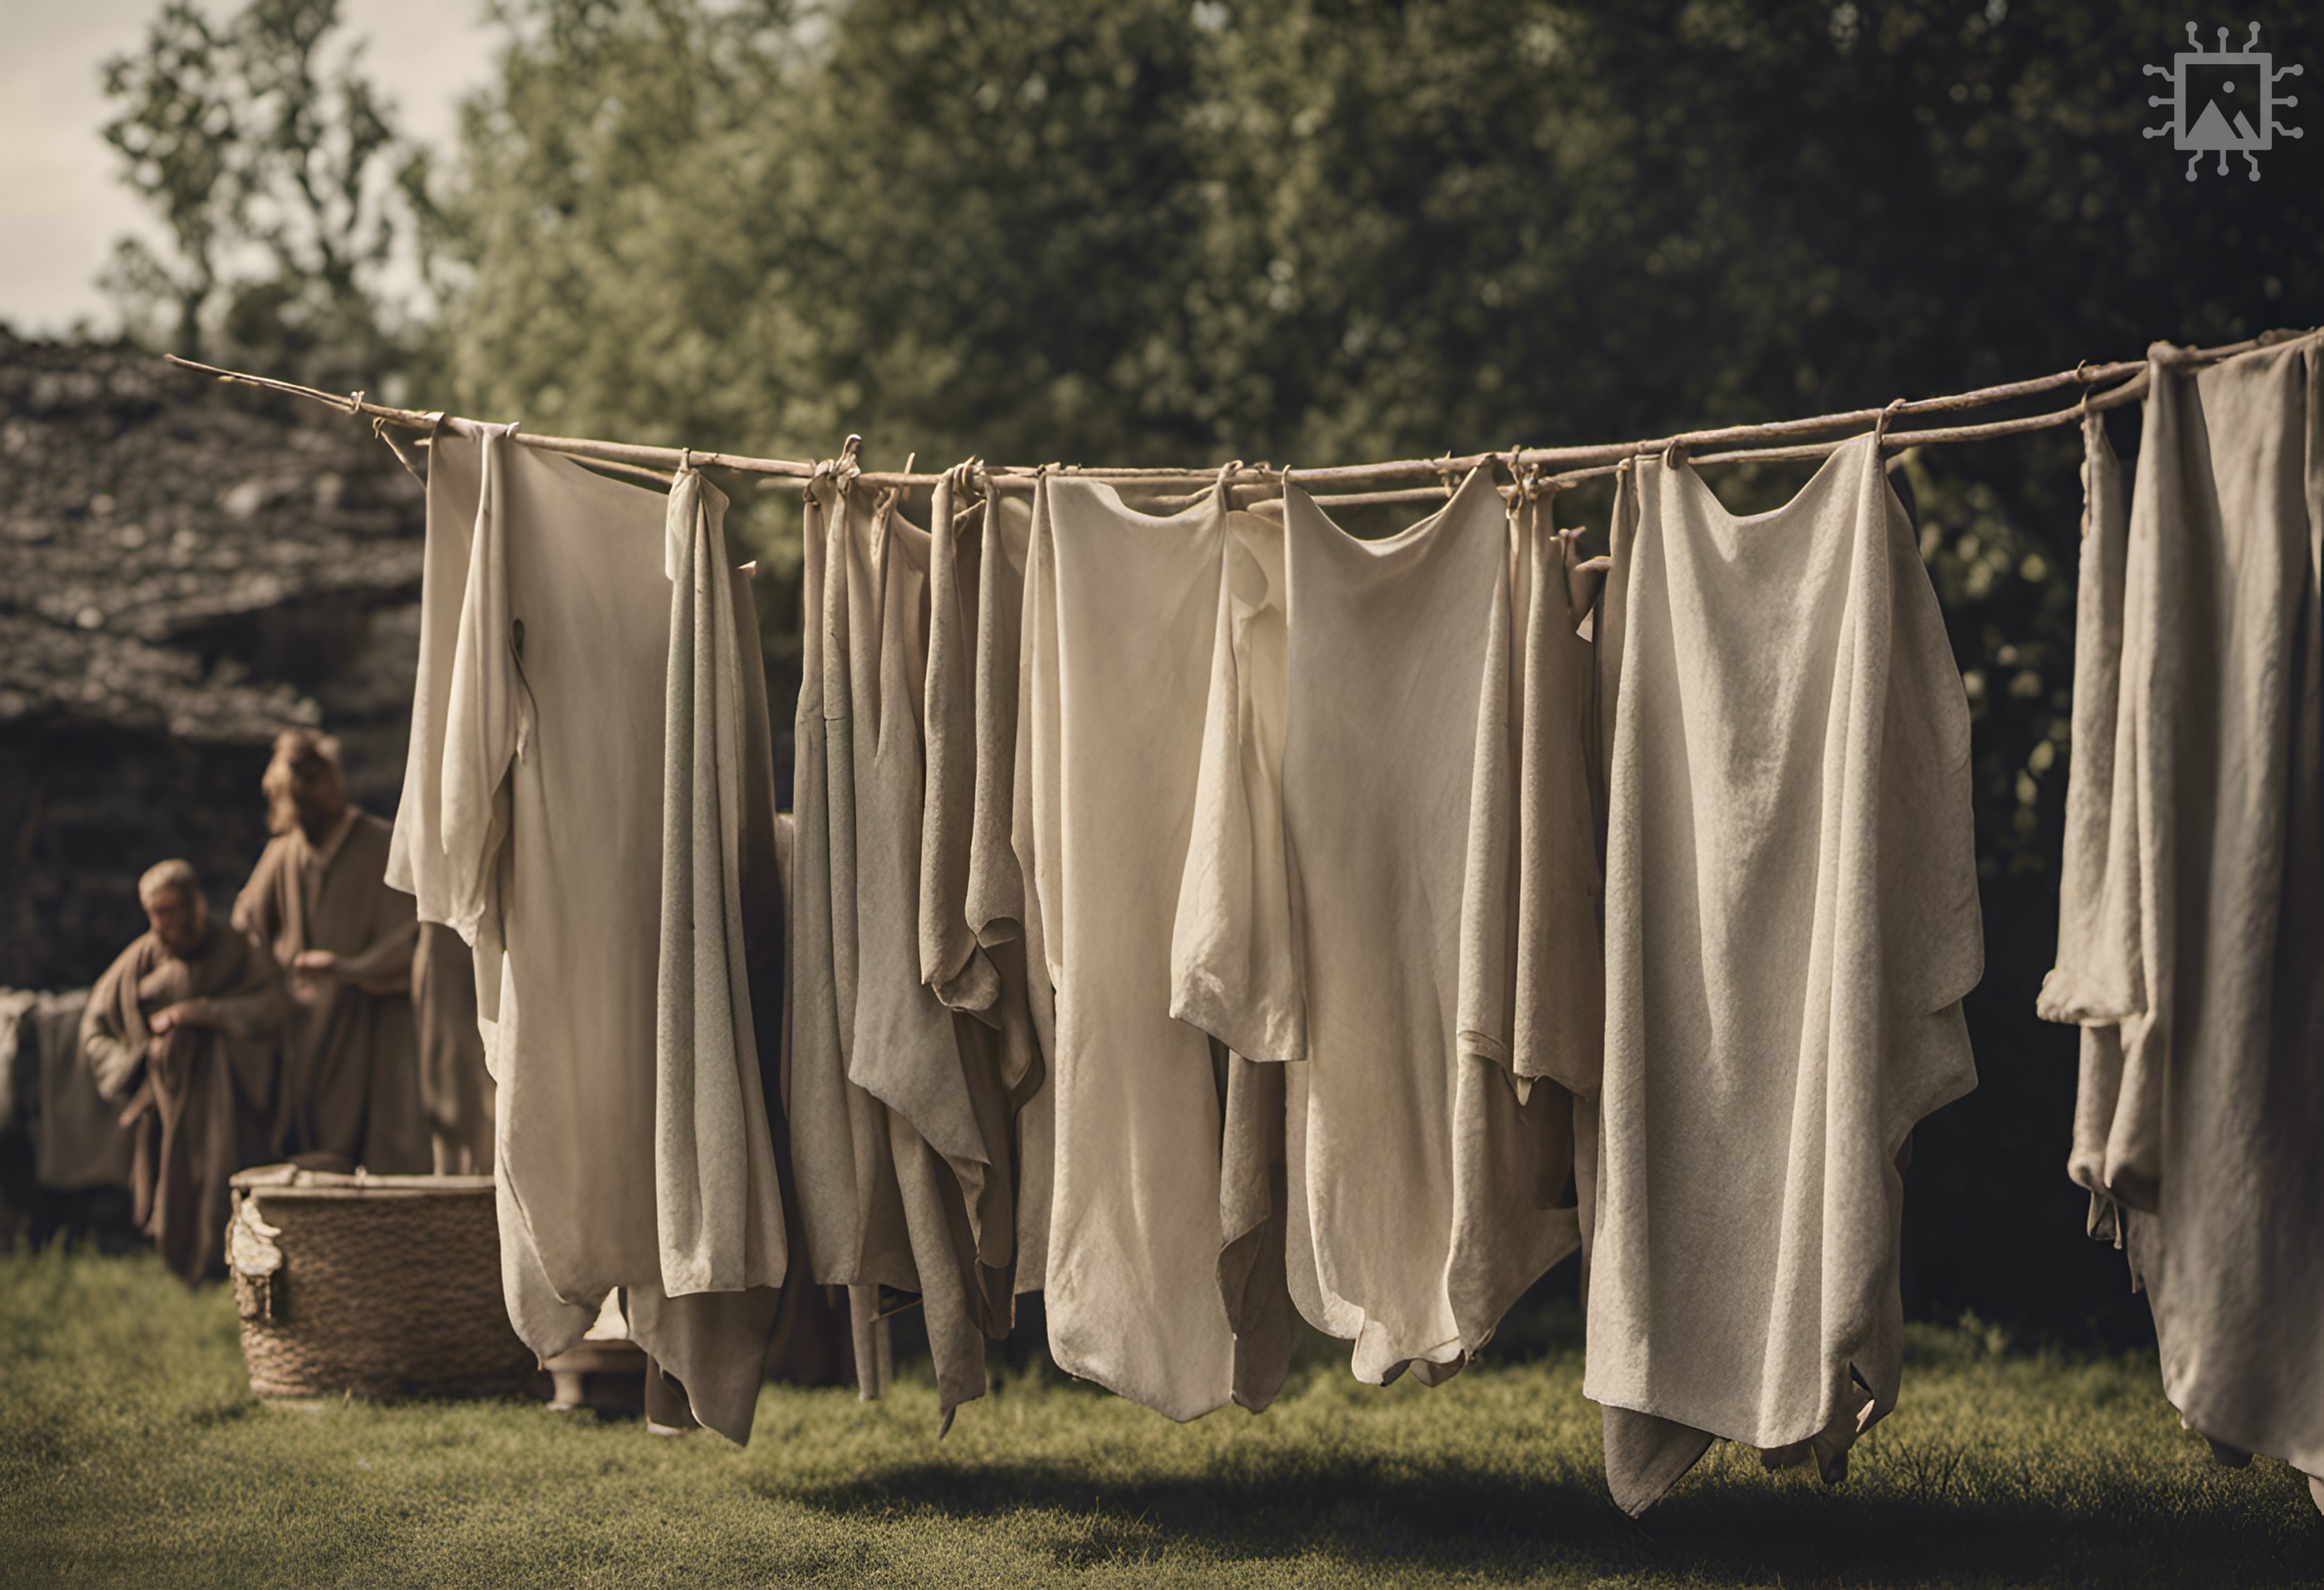 Artificial Intelligence-generated image produced using DreamStudio [accessed 20-09-2023]: ‘Early medieval servants hanging linen robes outside to dry.’ Find out more: rochestercathedral.org/research/ai